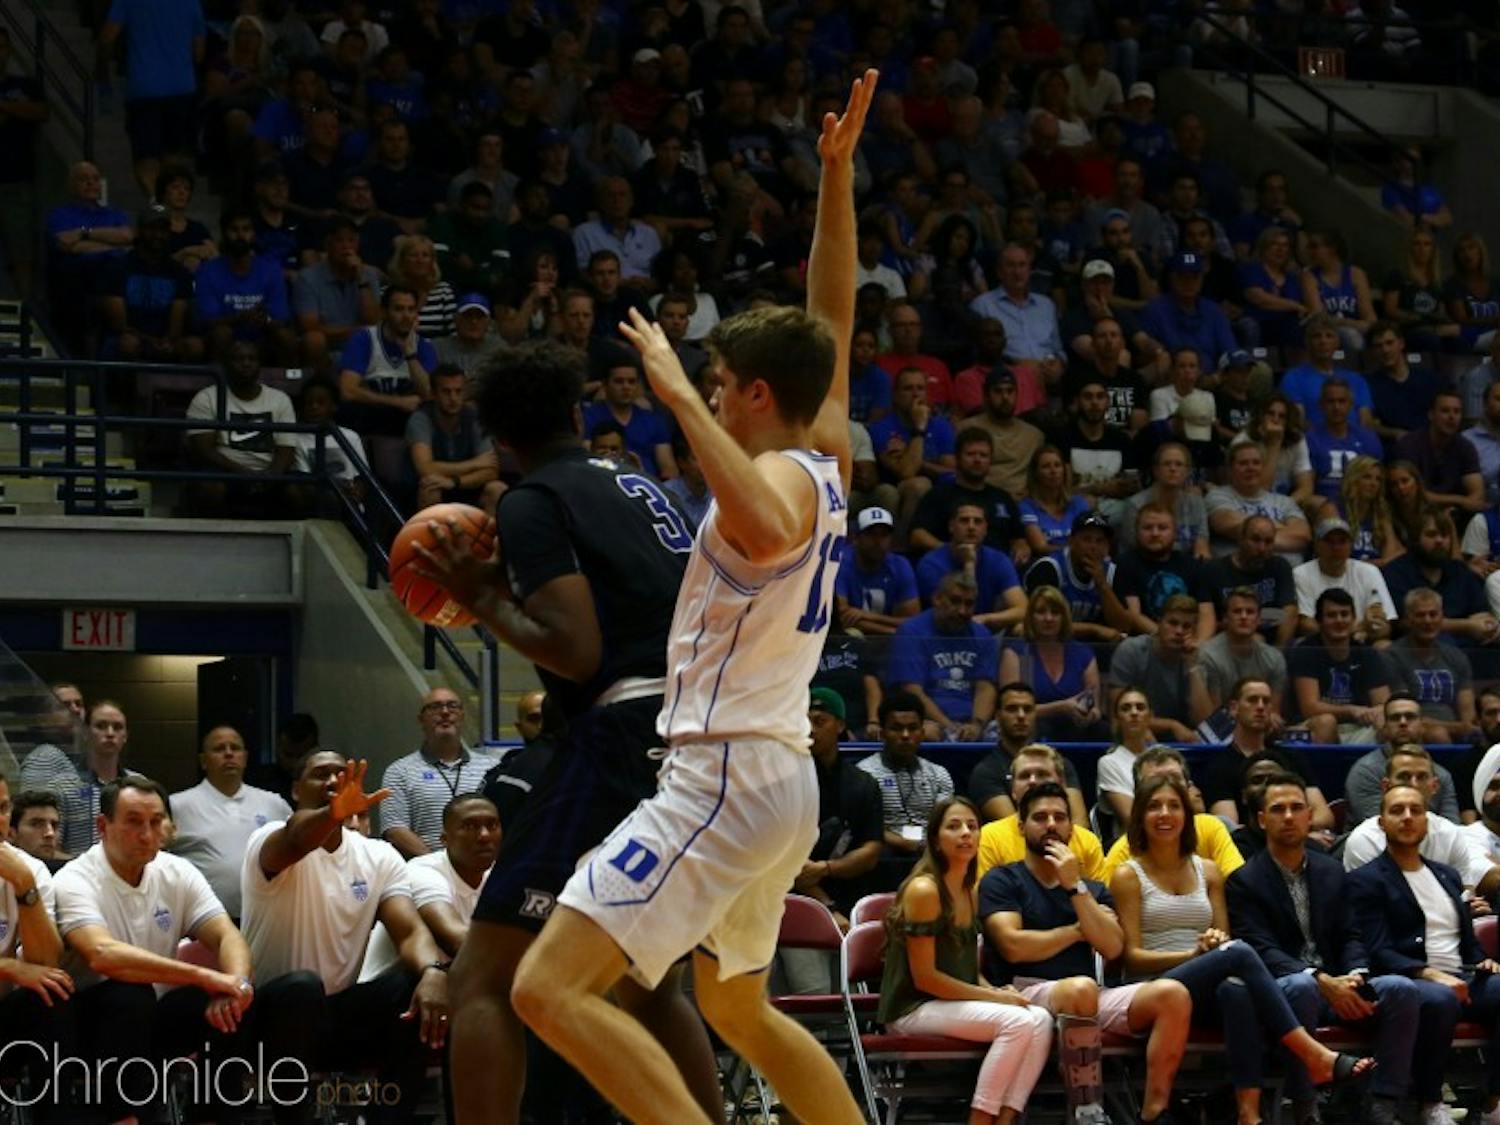 Joey Baker's projected playtime is still a mystery, however, his qualities as a basketball player could help the Blue Devils immensely this season.